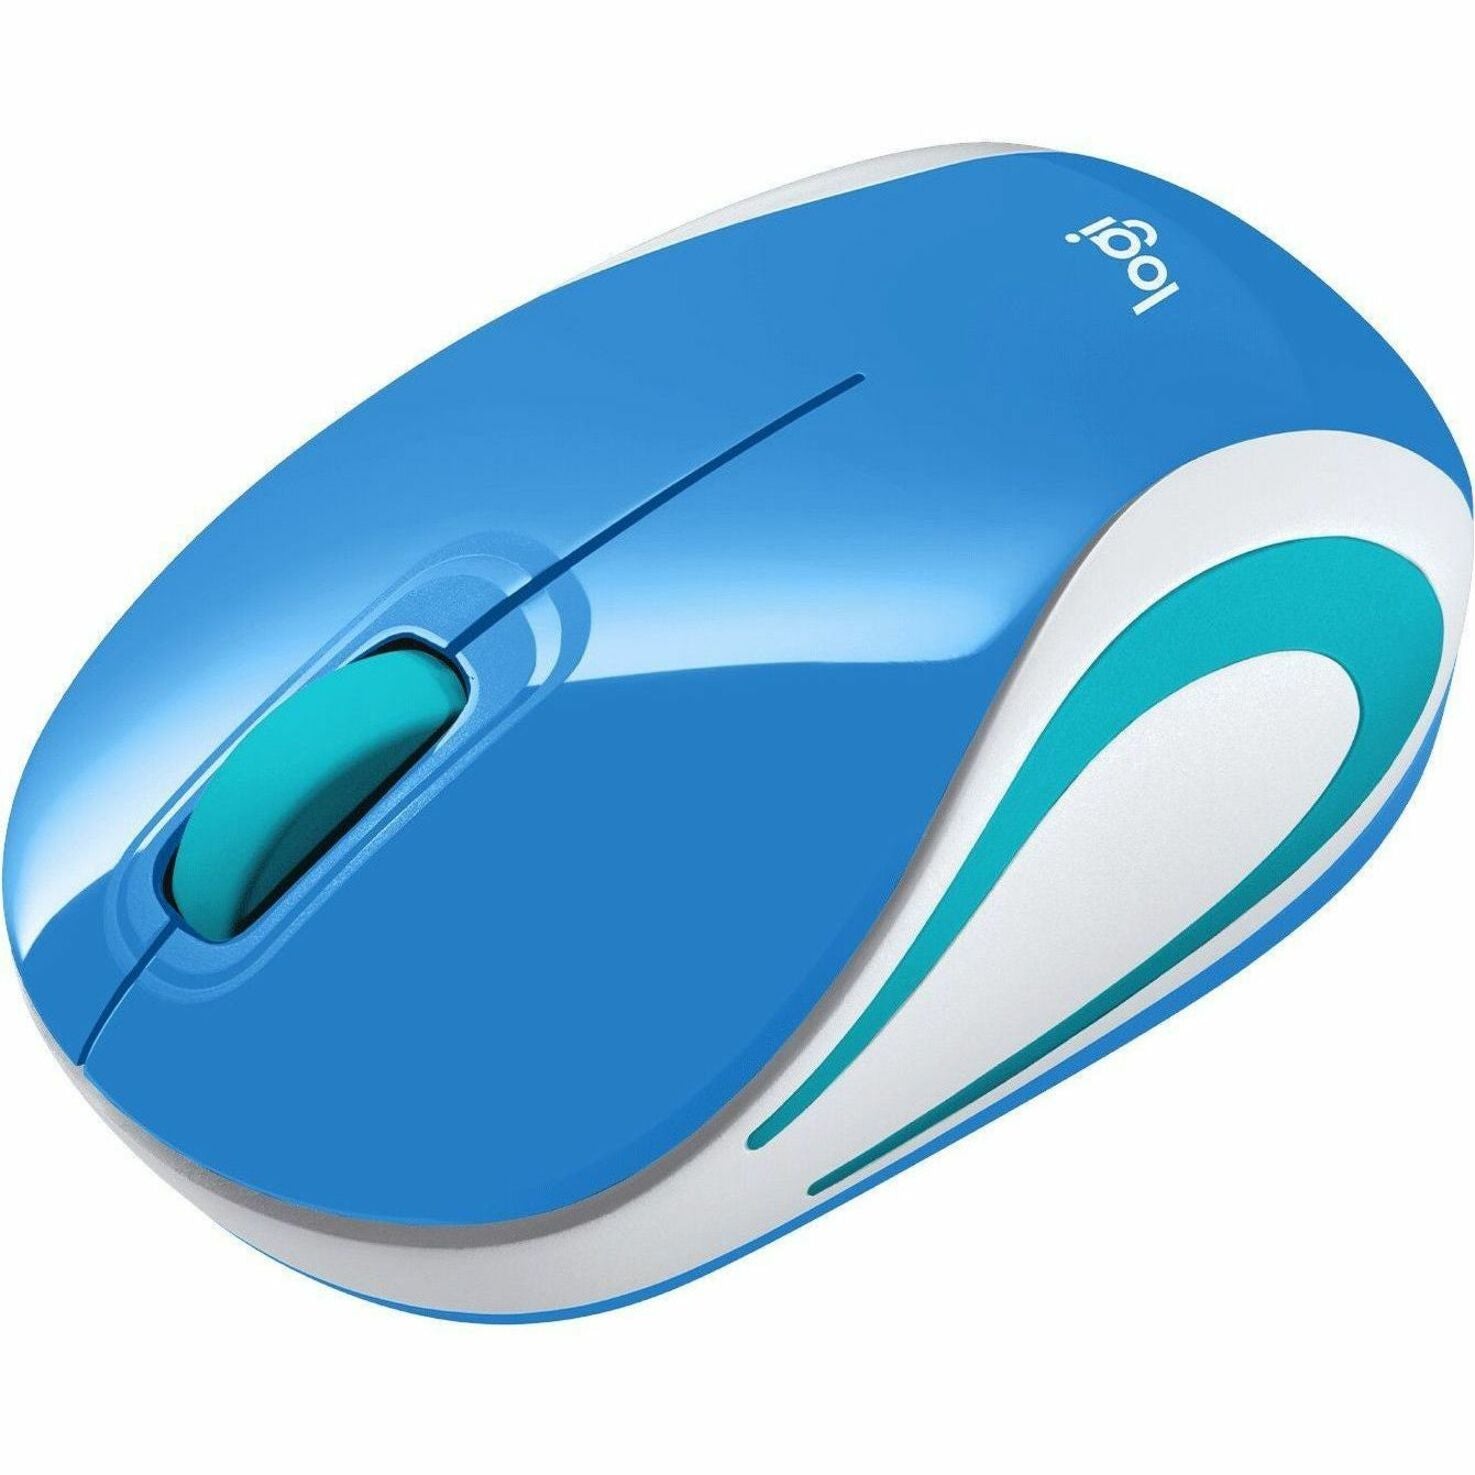 Logitech 910-004840 Wireless Ultra Portable M187 Mouse, Extra Small, 1000 dpi, 3 Buttons